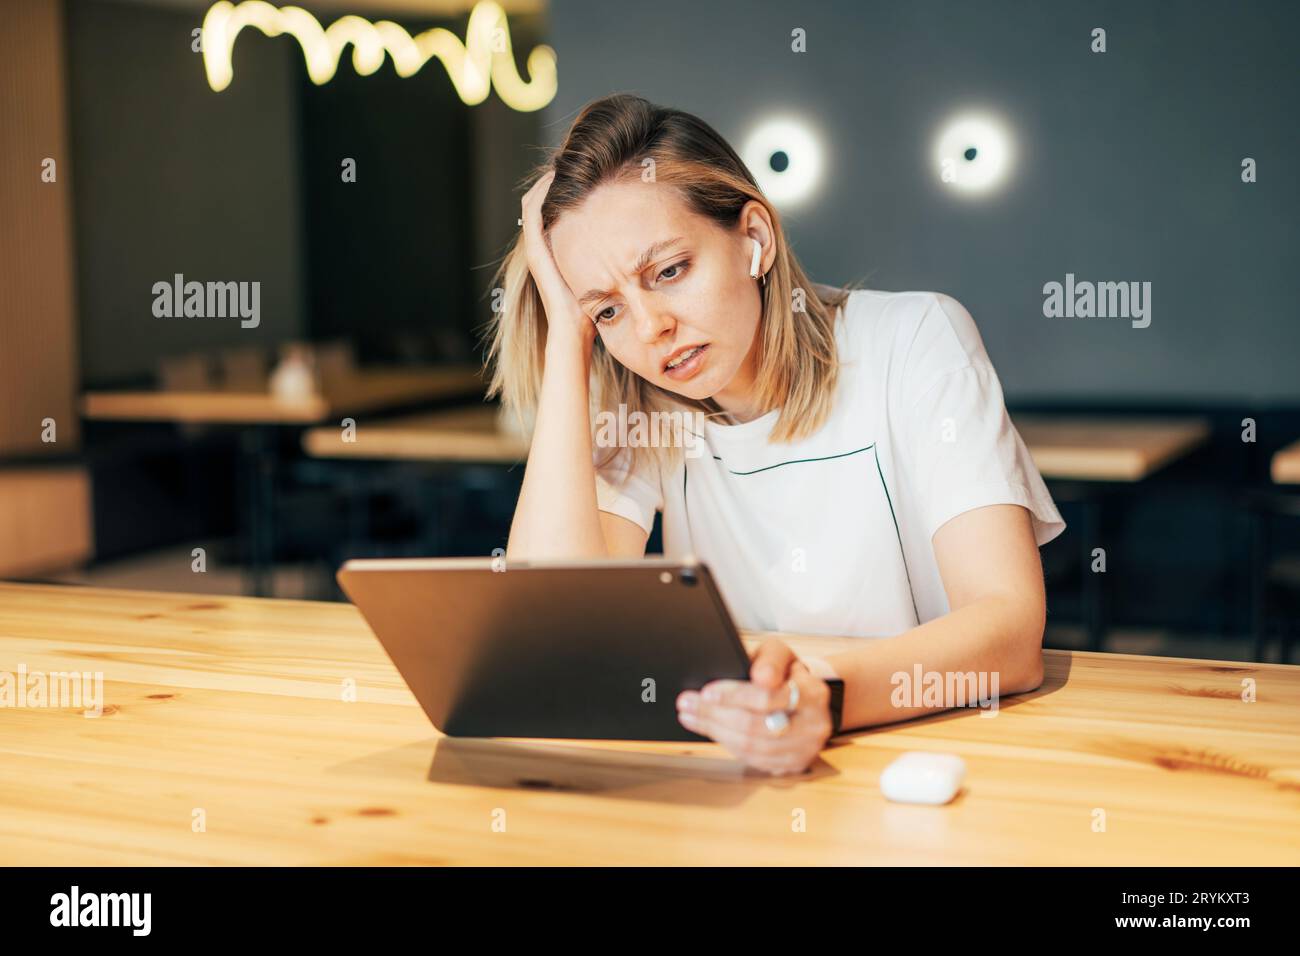 Upset stressful woman looks at the screen of a digital tablet. Disappointment at work Stock Photo